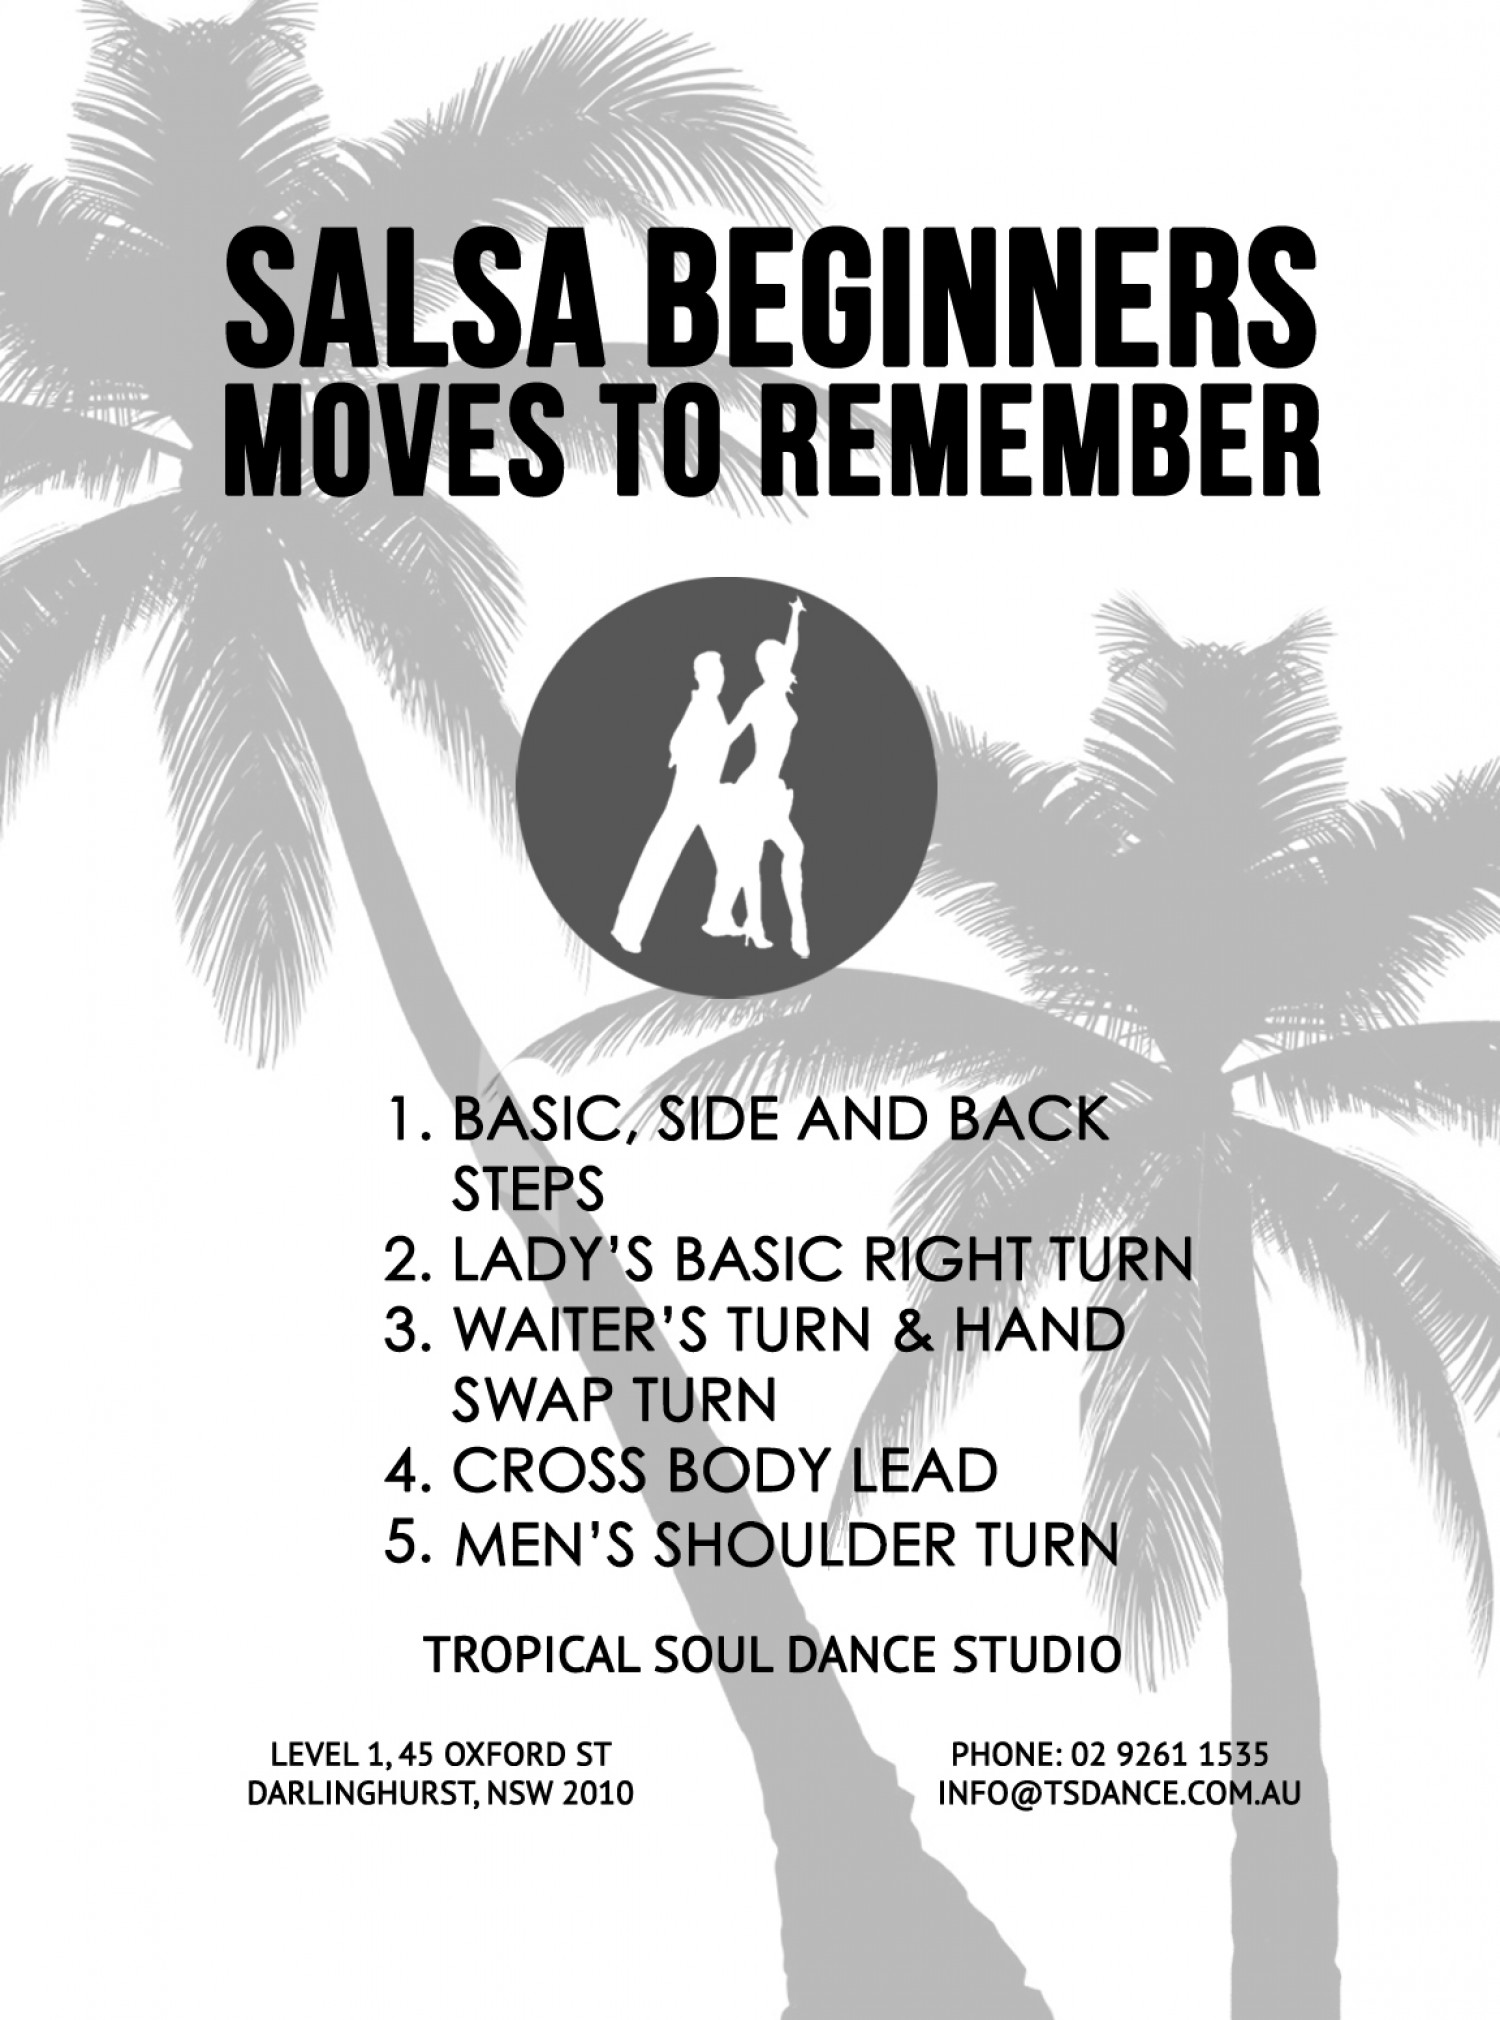 Salsa Beginners steps by Tropical Soul Dance Studio Infographic